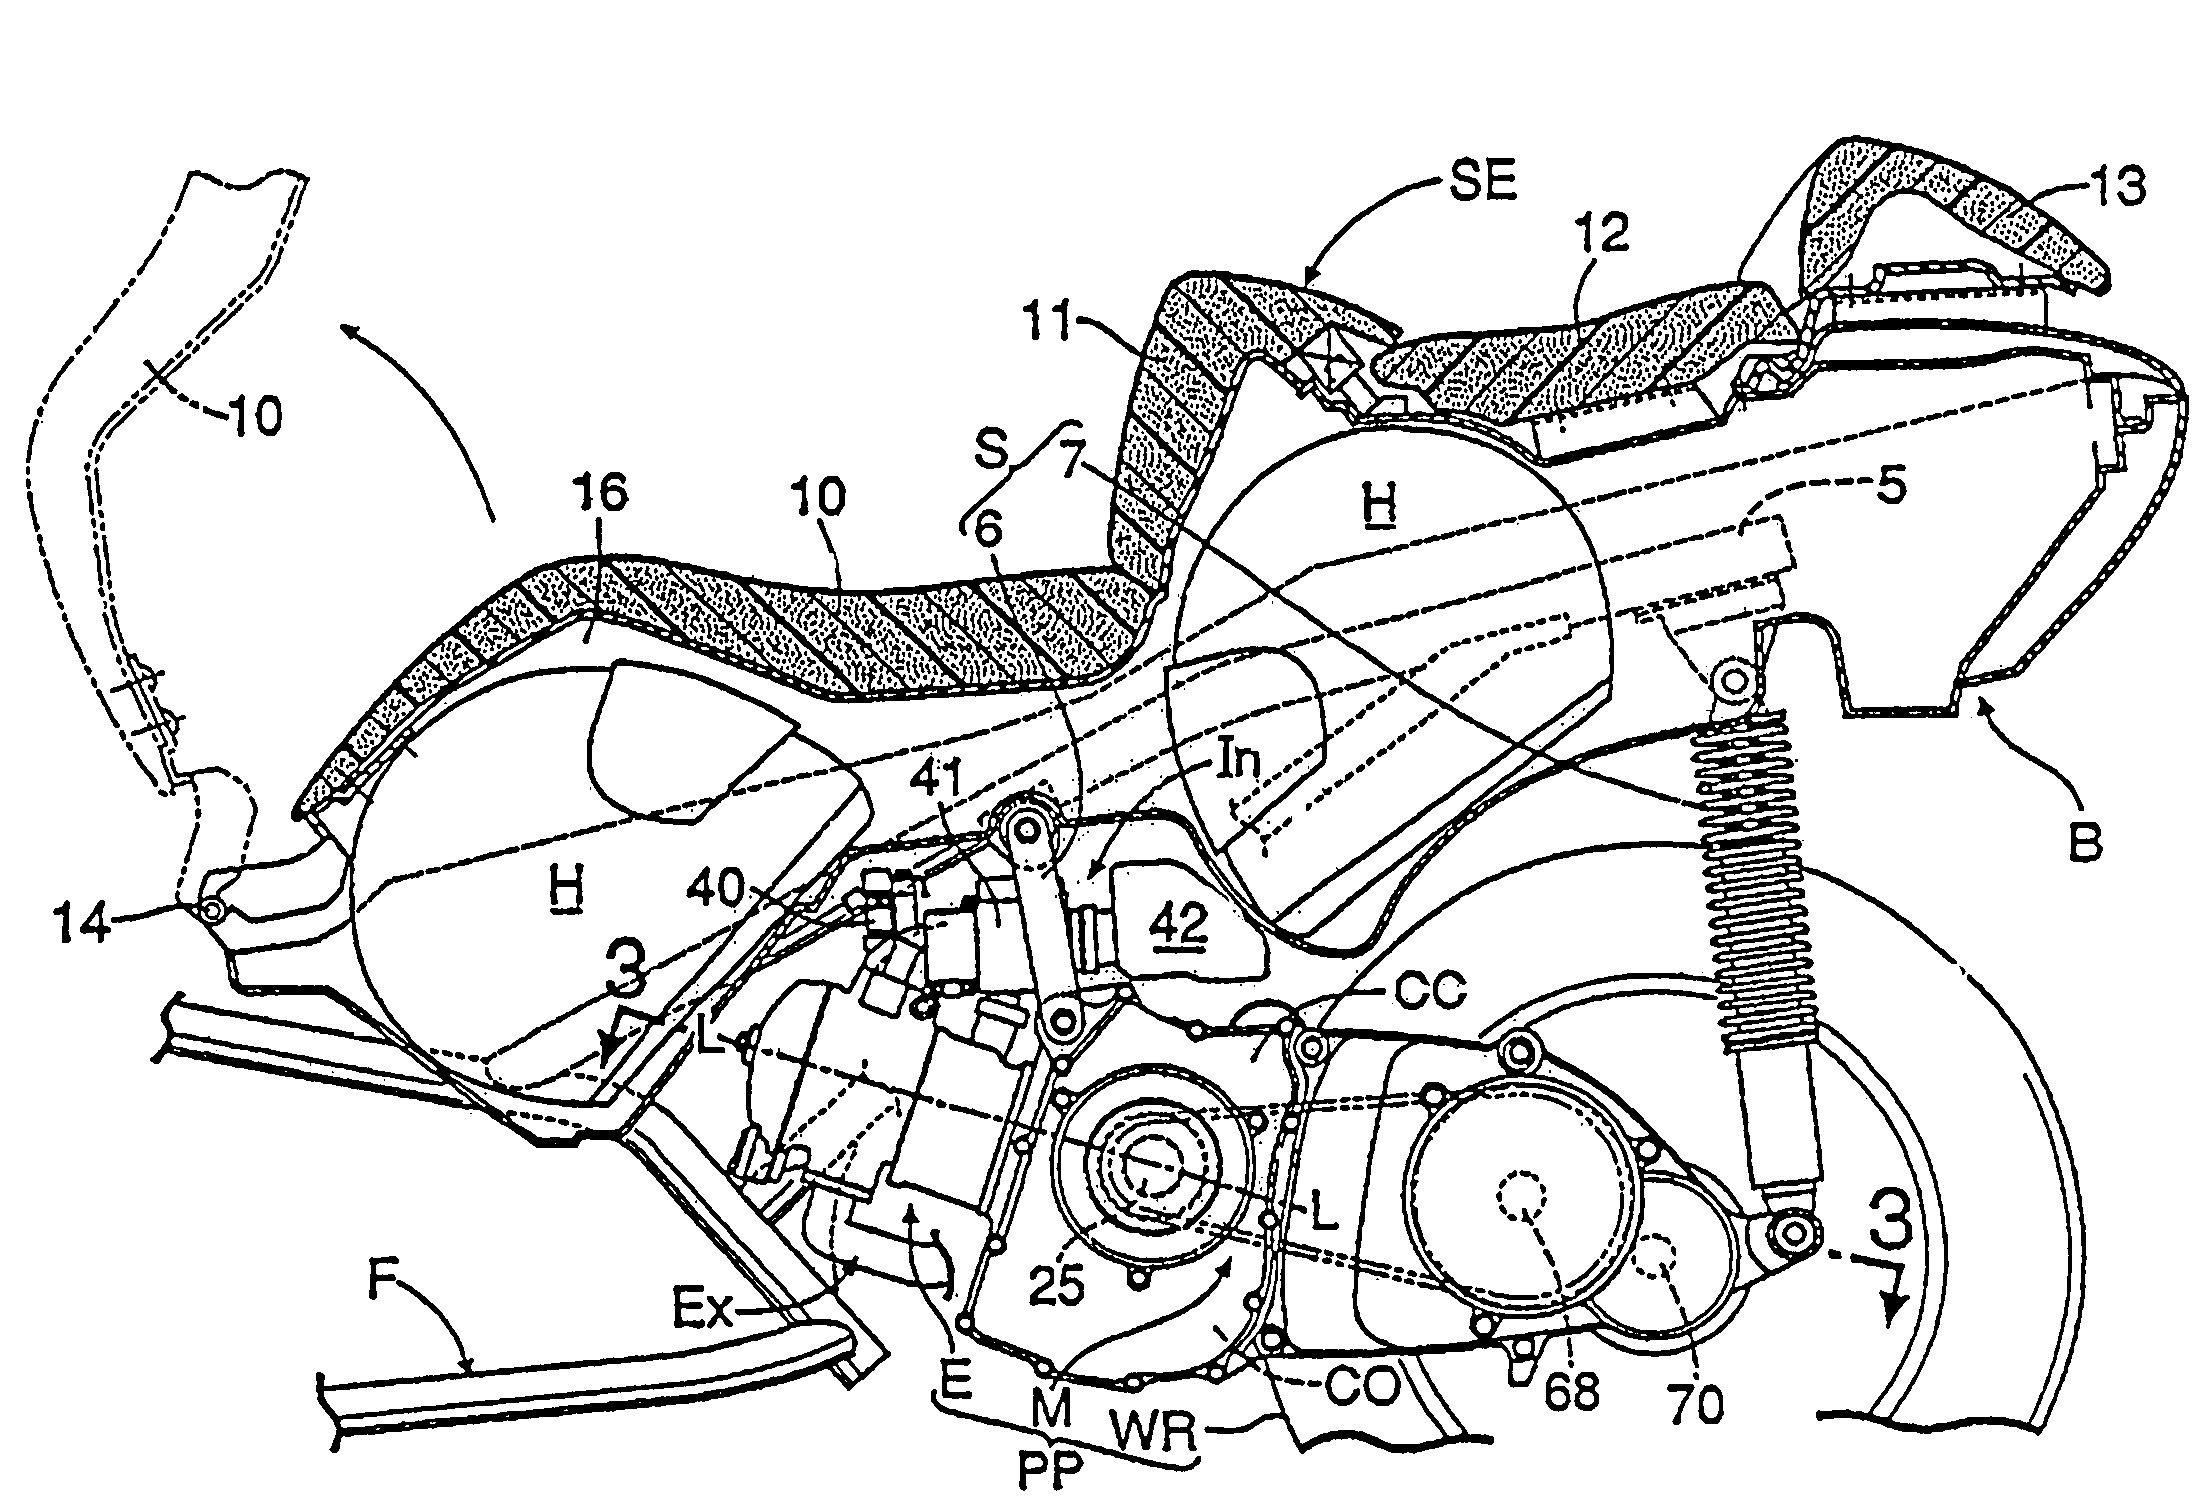 Engine configuration for a motorcycle